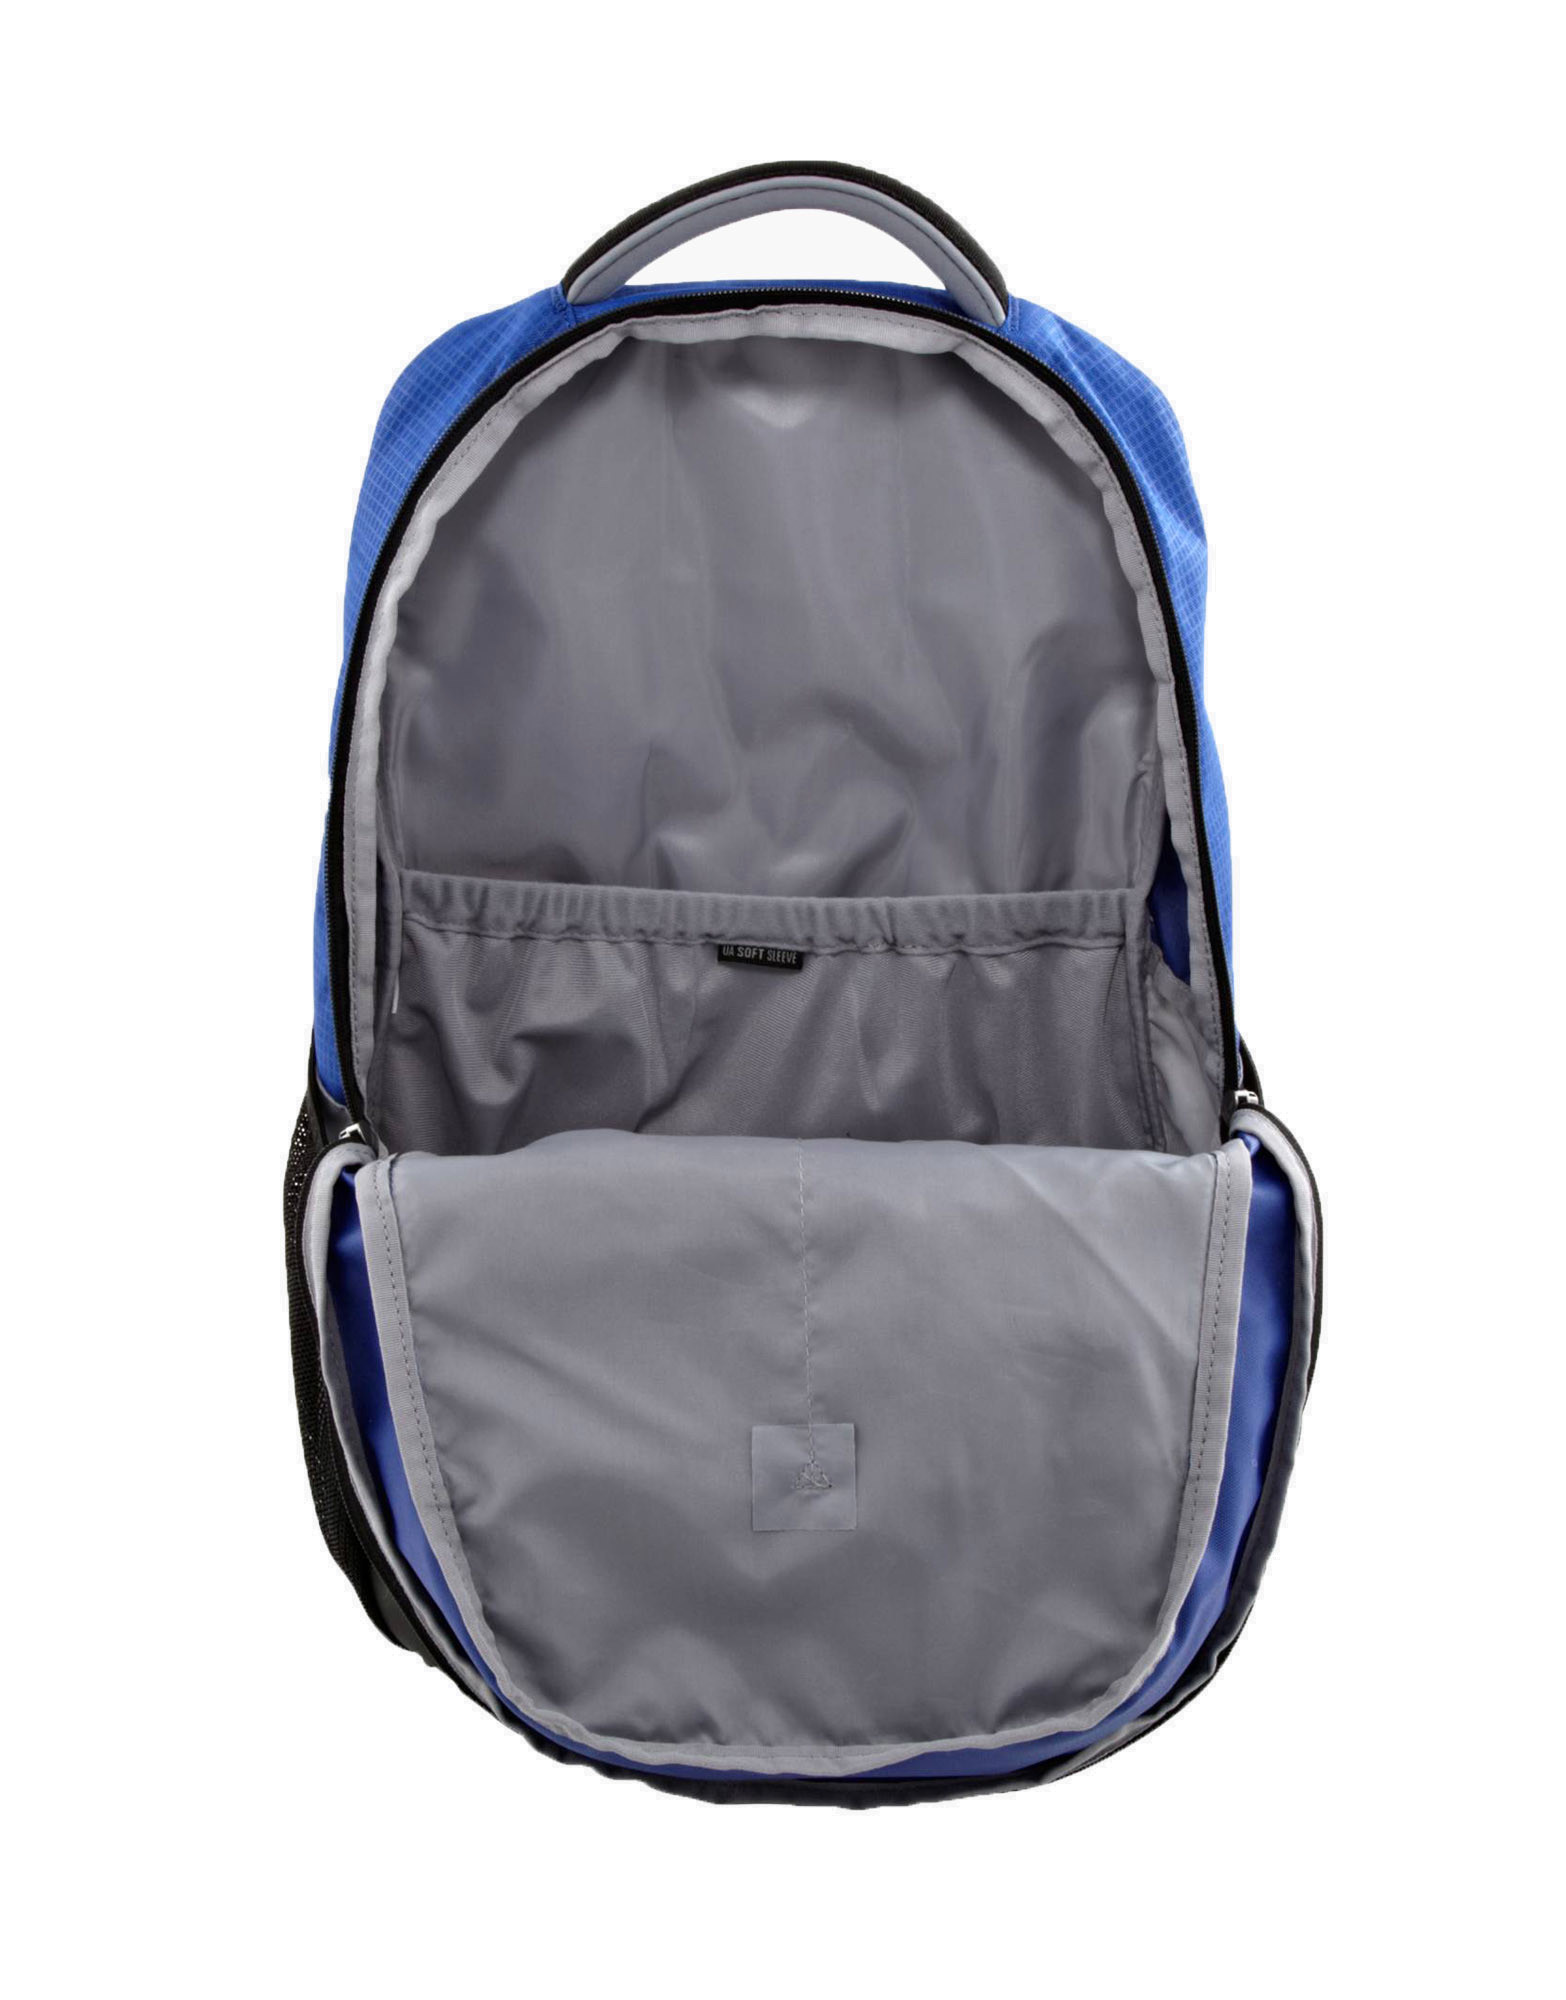 UA Storm Hustle Backpack by UNDER ARMOUR (colour: royal)